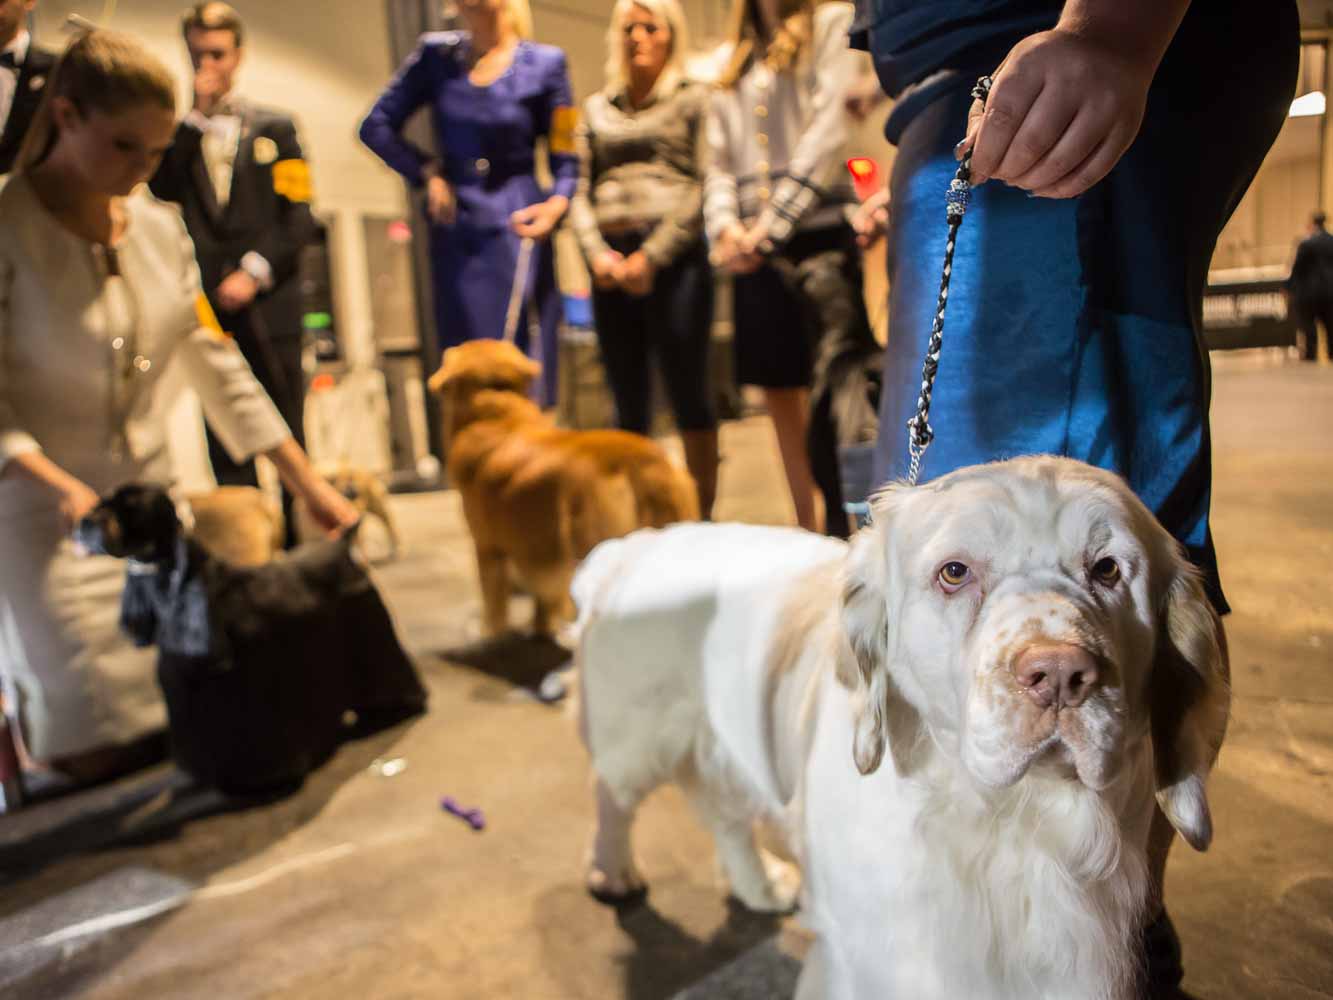 Dogs and their handlers in the Junior Showmanship division at the 137th annual Westminster Kennel Club dog show.